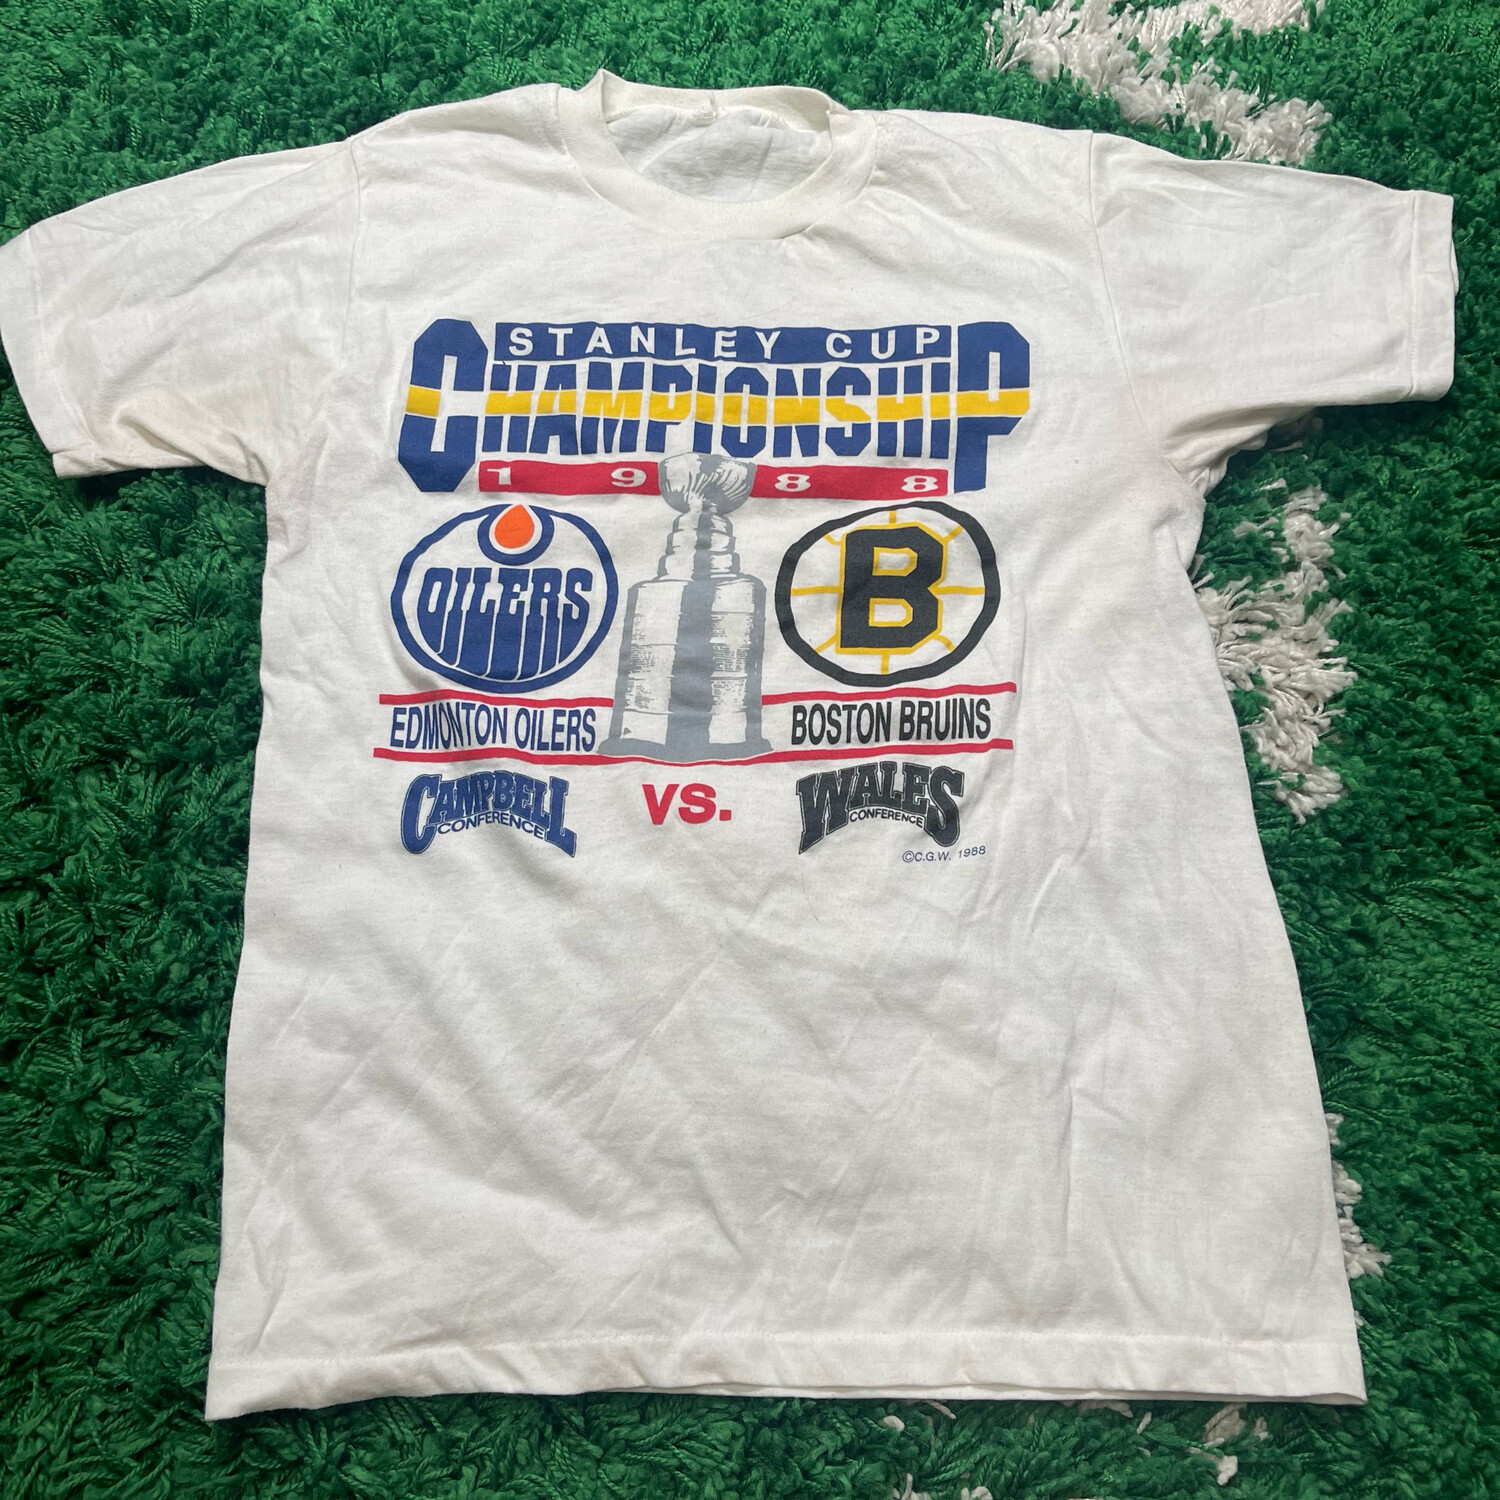 Stanley Cup Championship 1988 Size Small